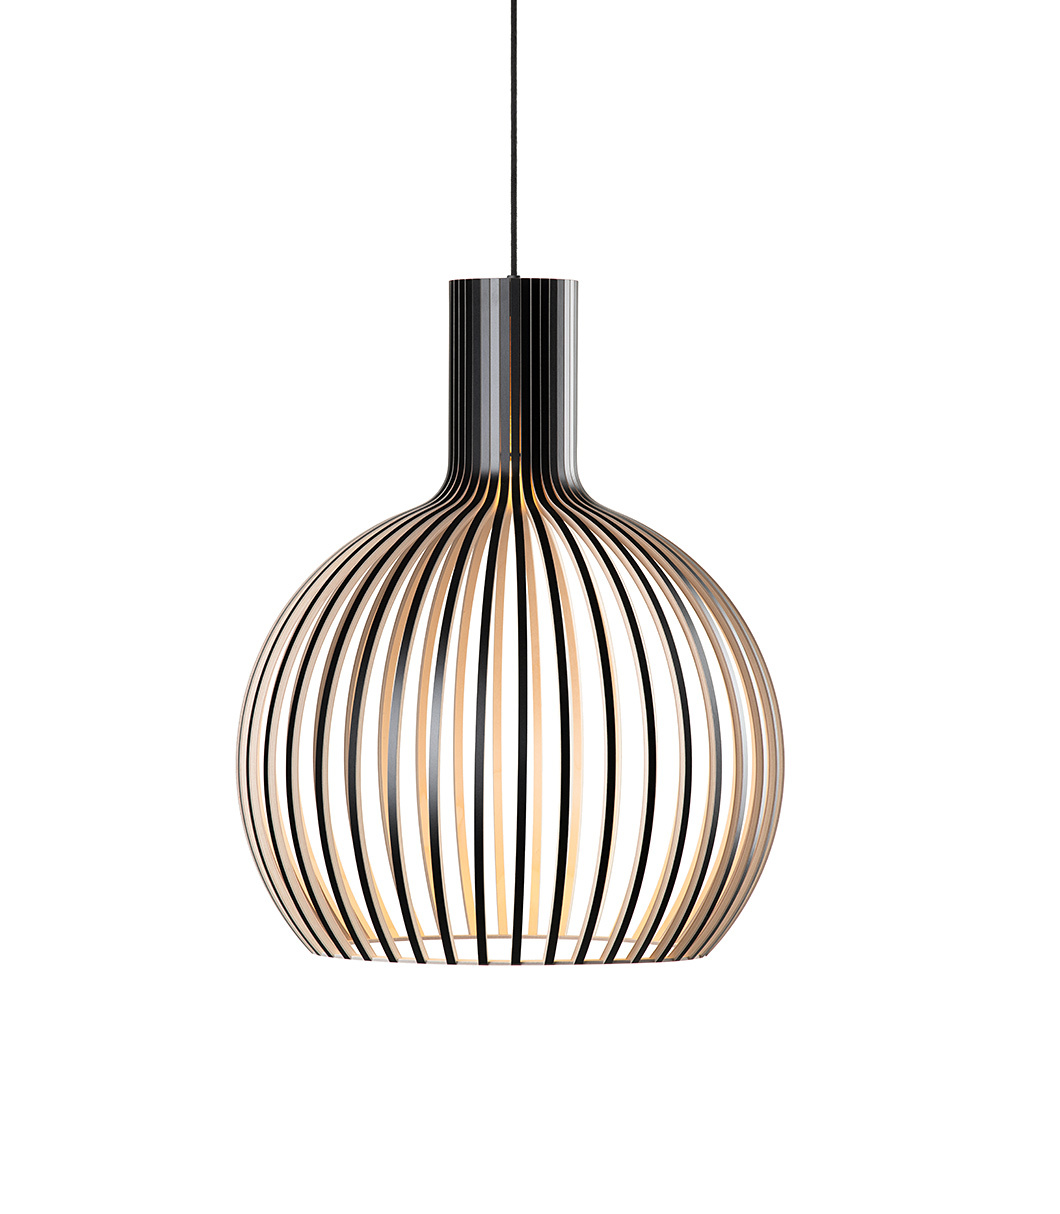 Octo Small 4241 pendant lamp is available in black laminated